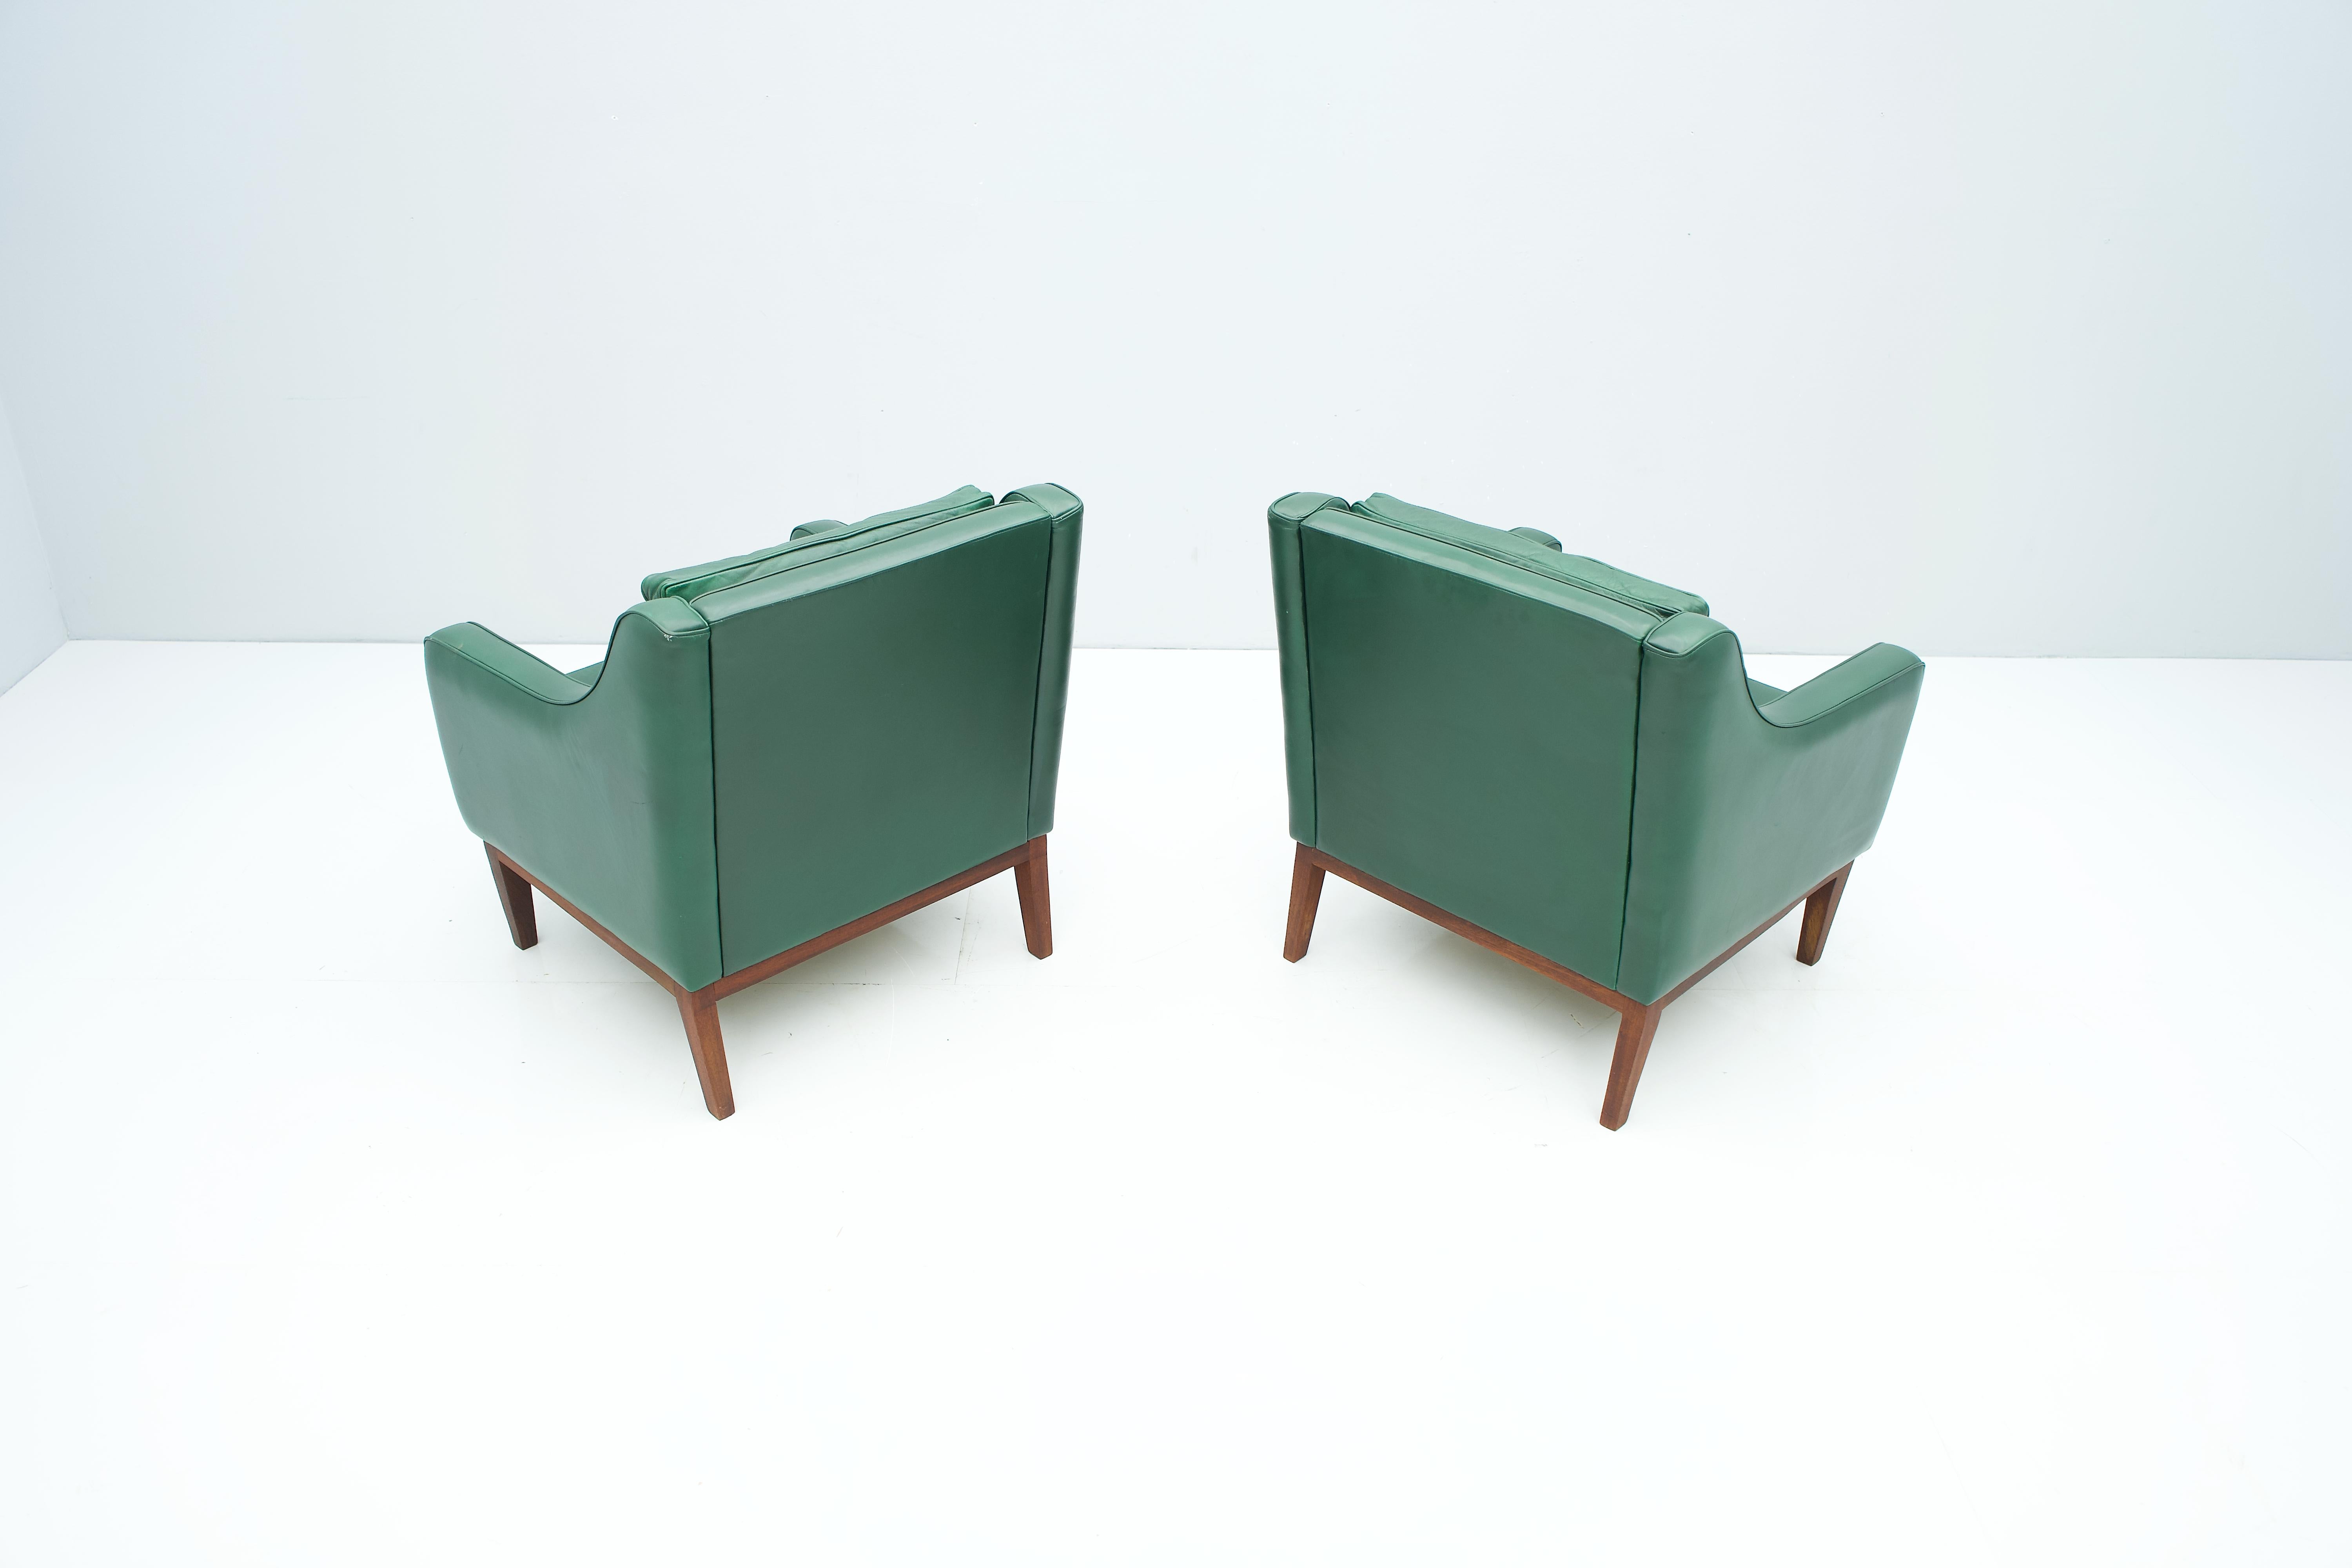 Pair of Italian Lounge Chairs in Green Leather, 1958 For Sale 3